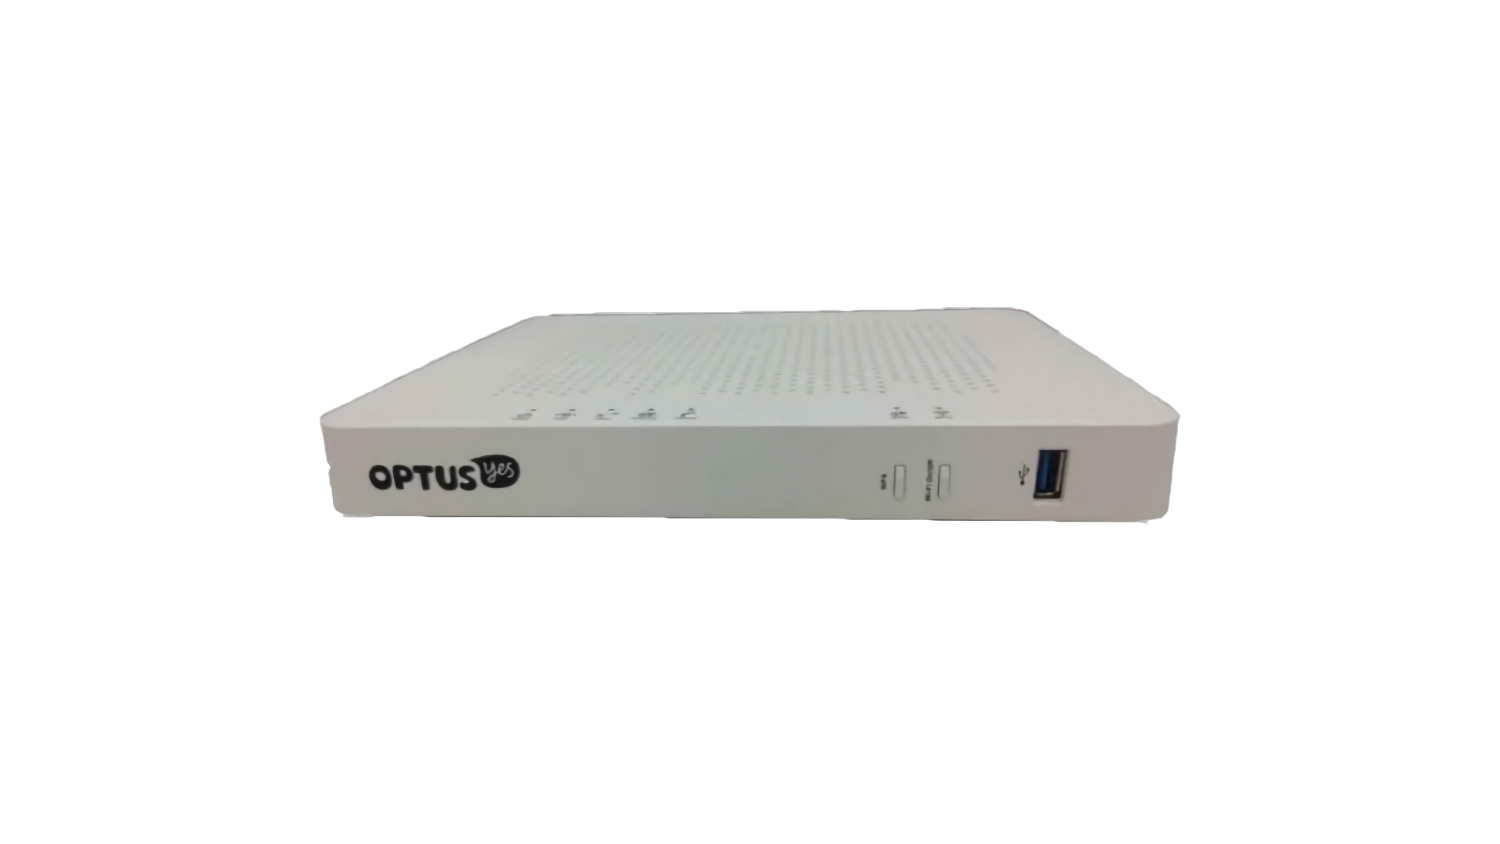 sandhed Lydighed Ananiver Sagemcom F@ST 3864OP (Optus) Review | NBN modem-router | CHOICE